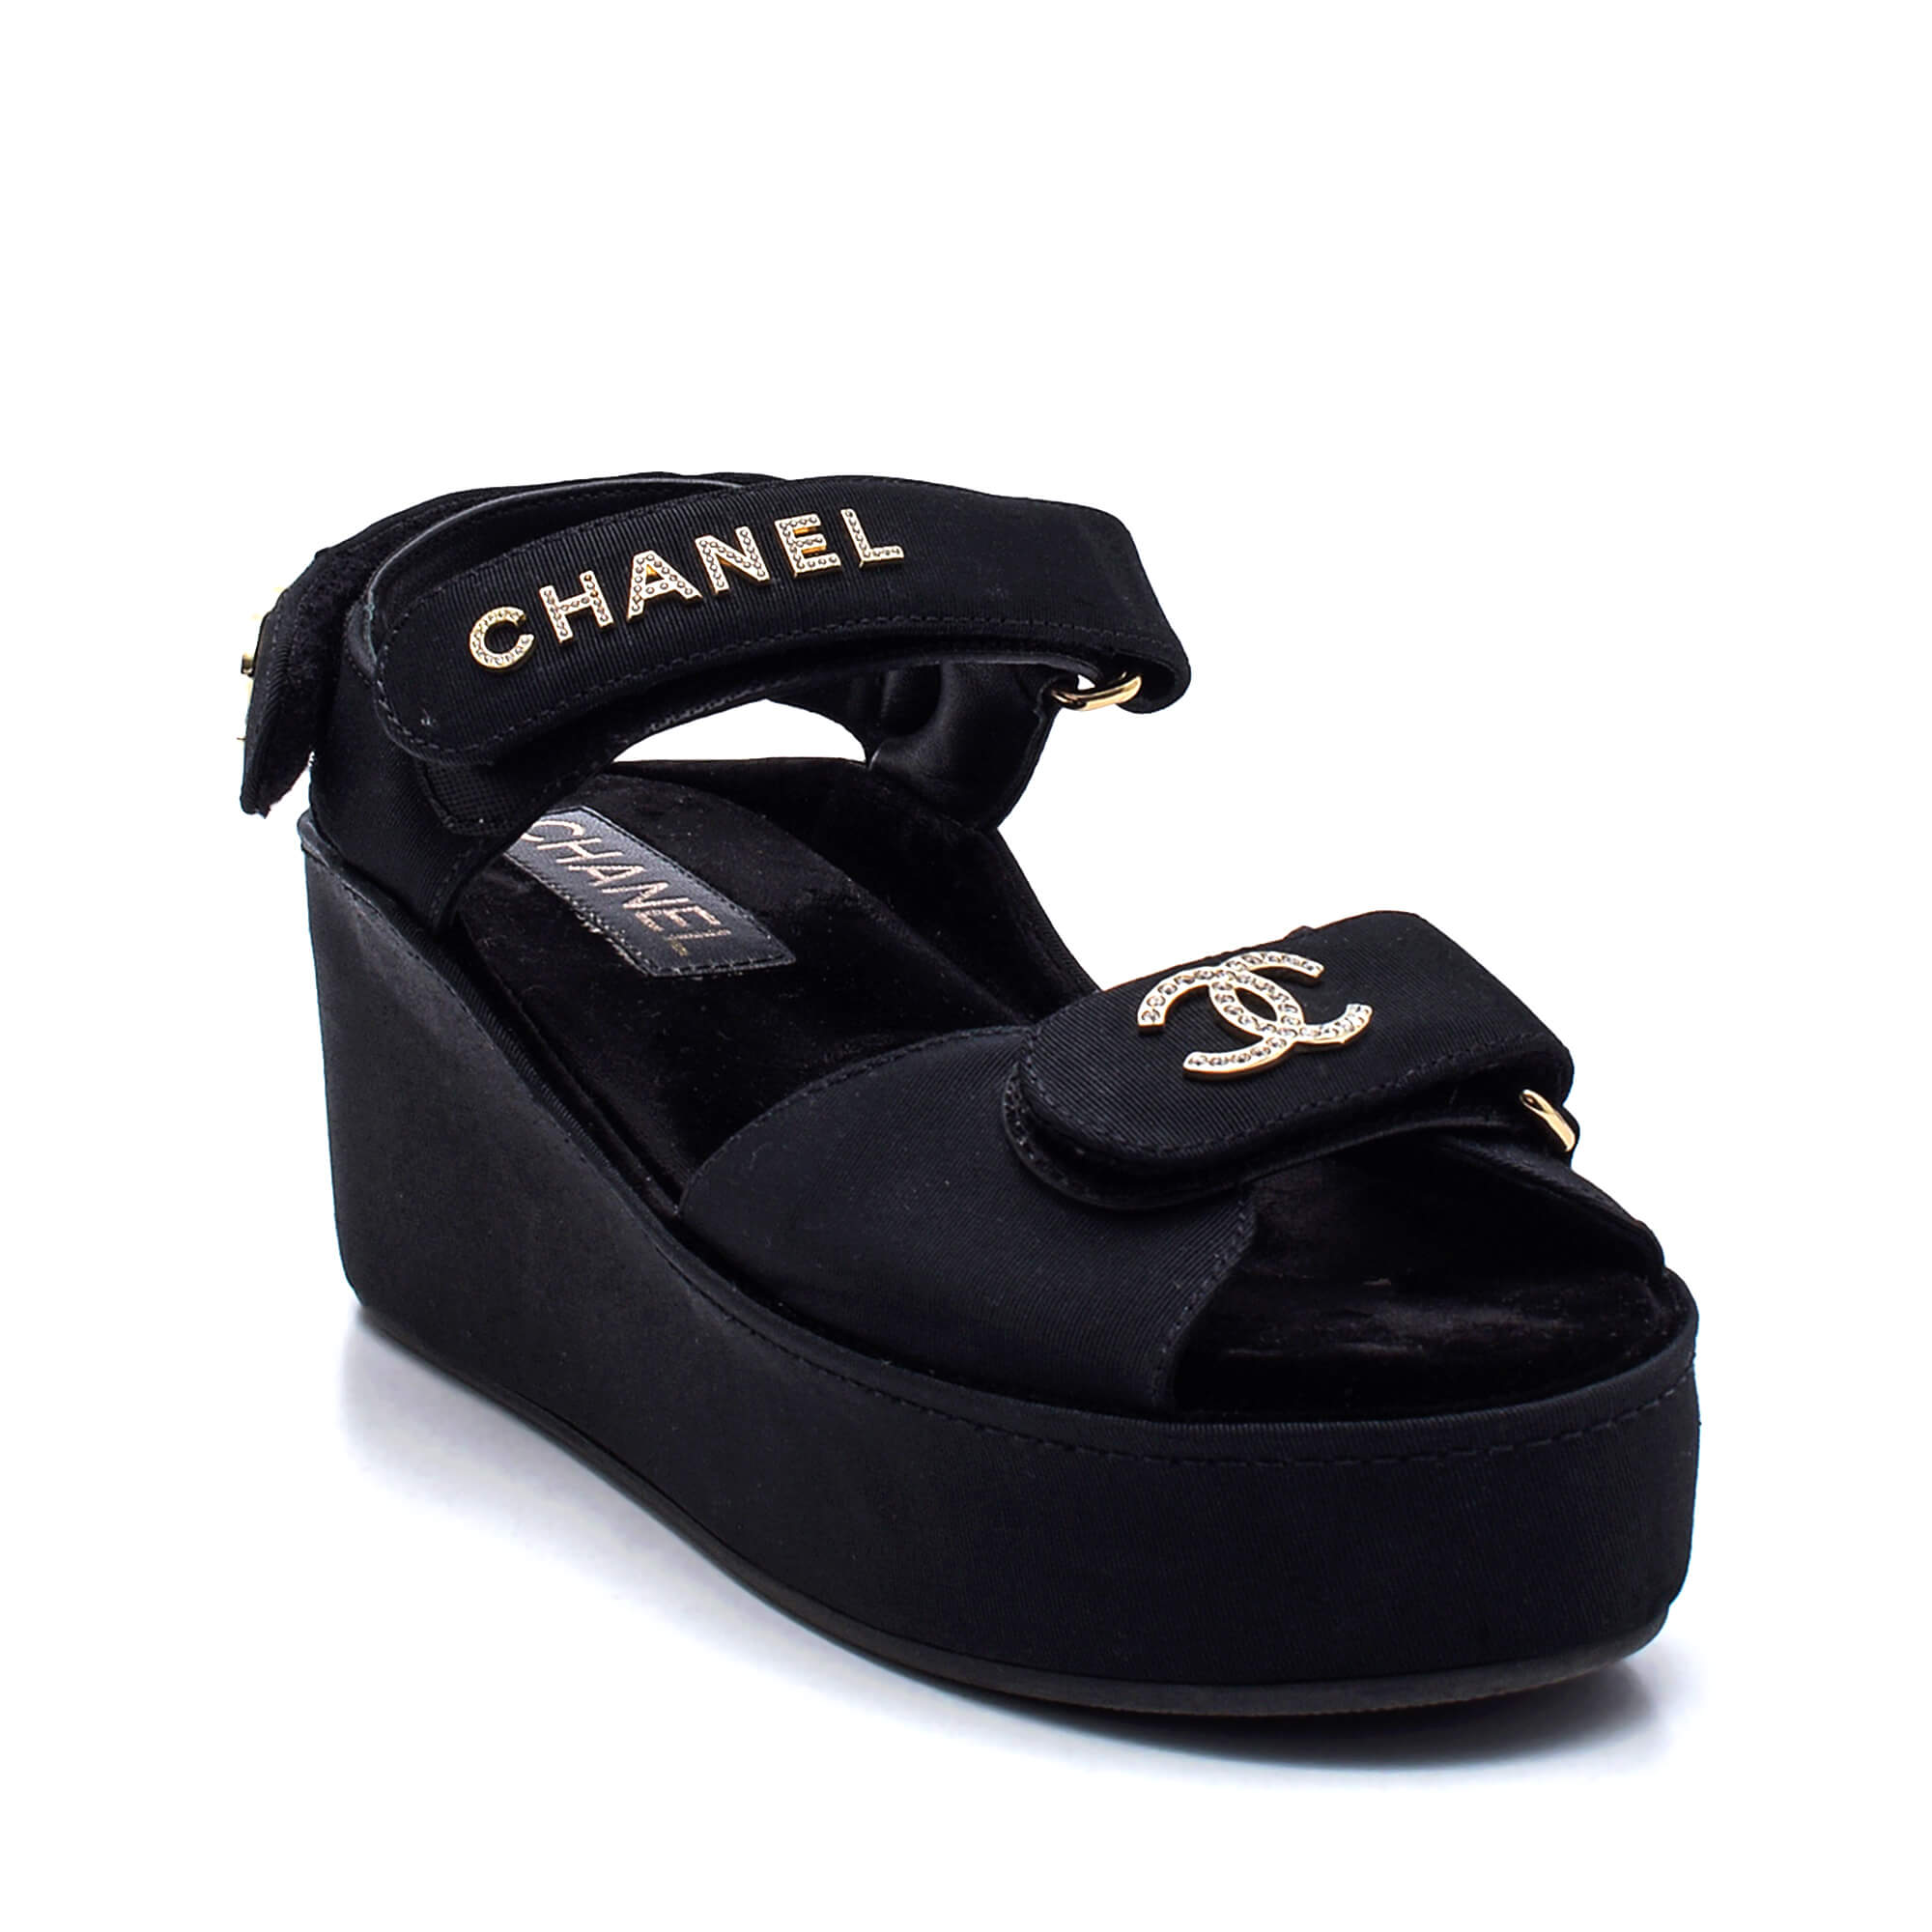 Chanel - Black Canvas Crystal Chanel and CC Logo Strap Wedge Sandals